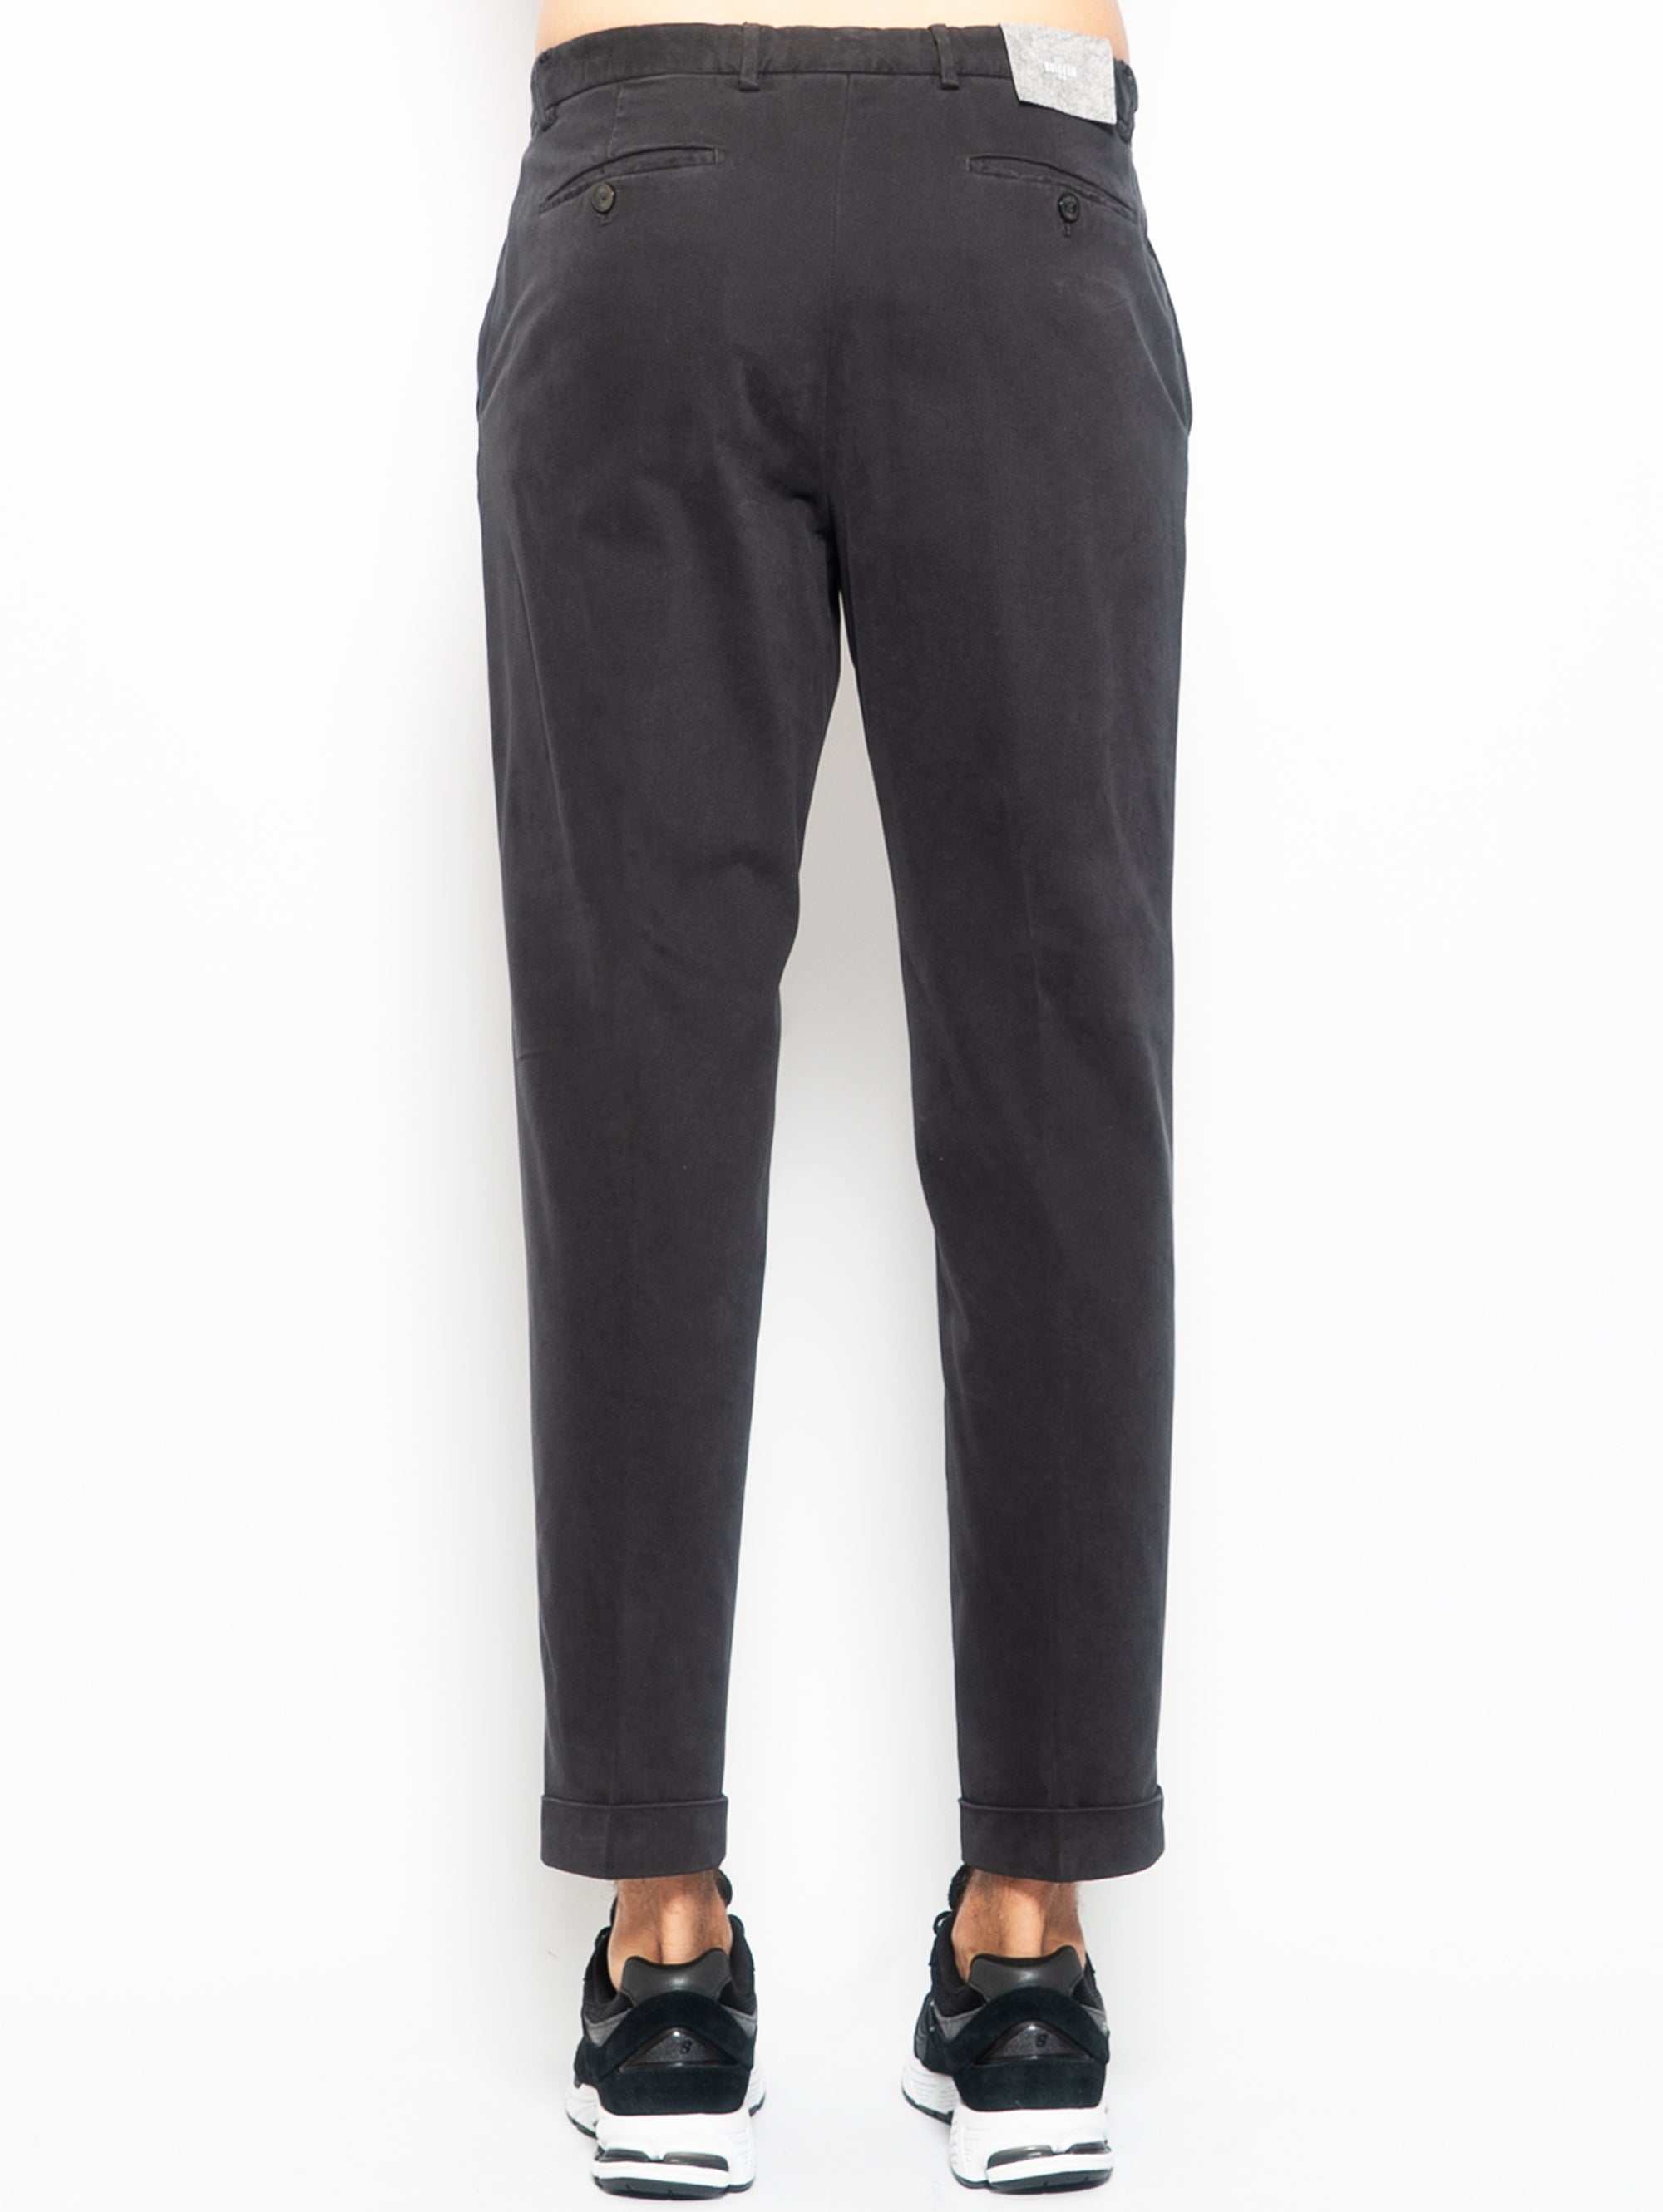 Anthracite Chino Trousers with Elastic Waist